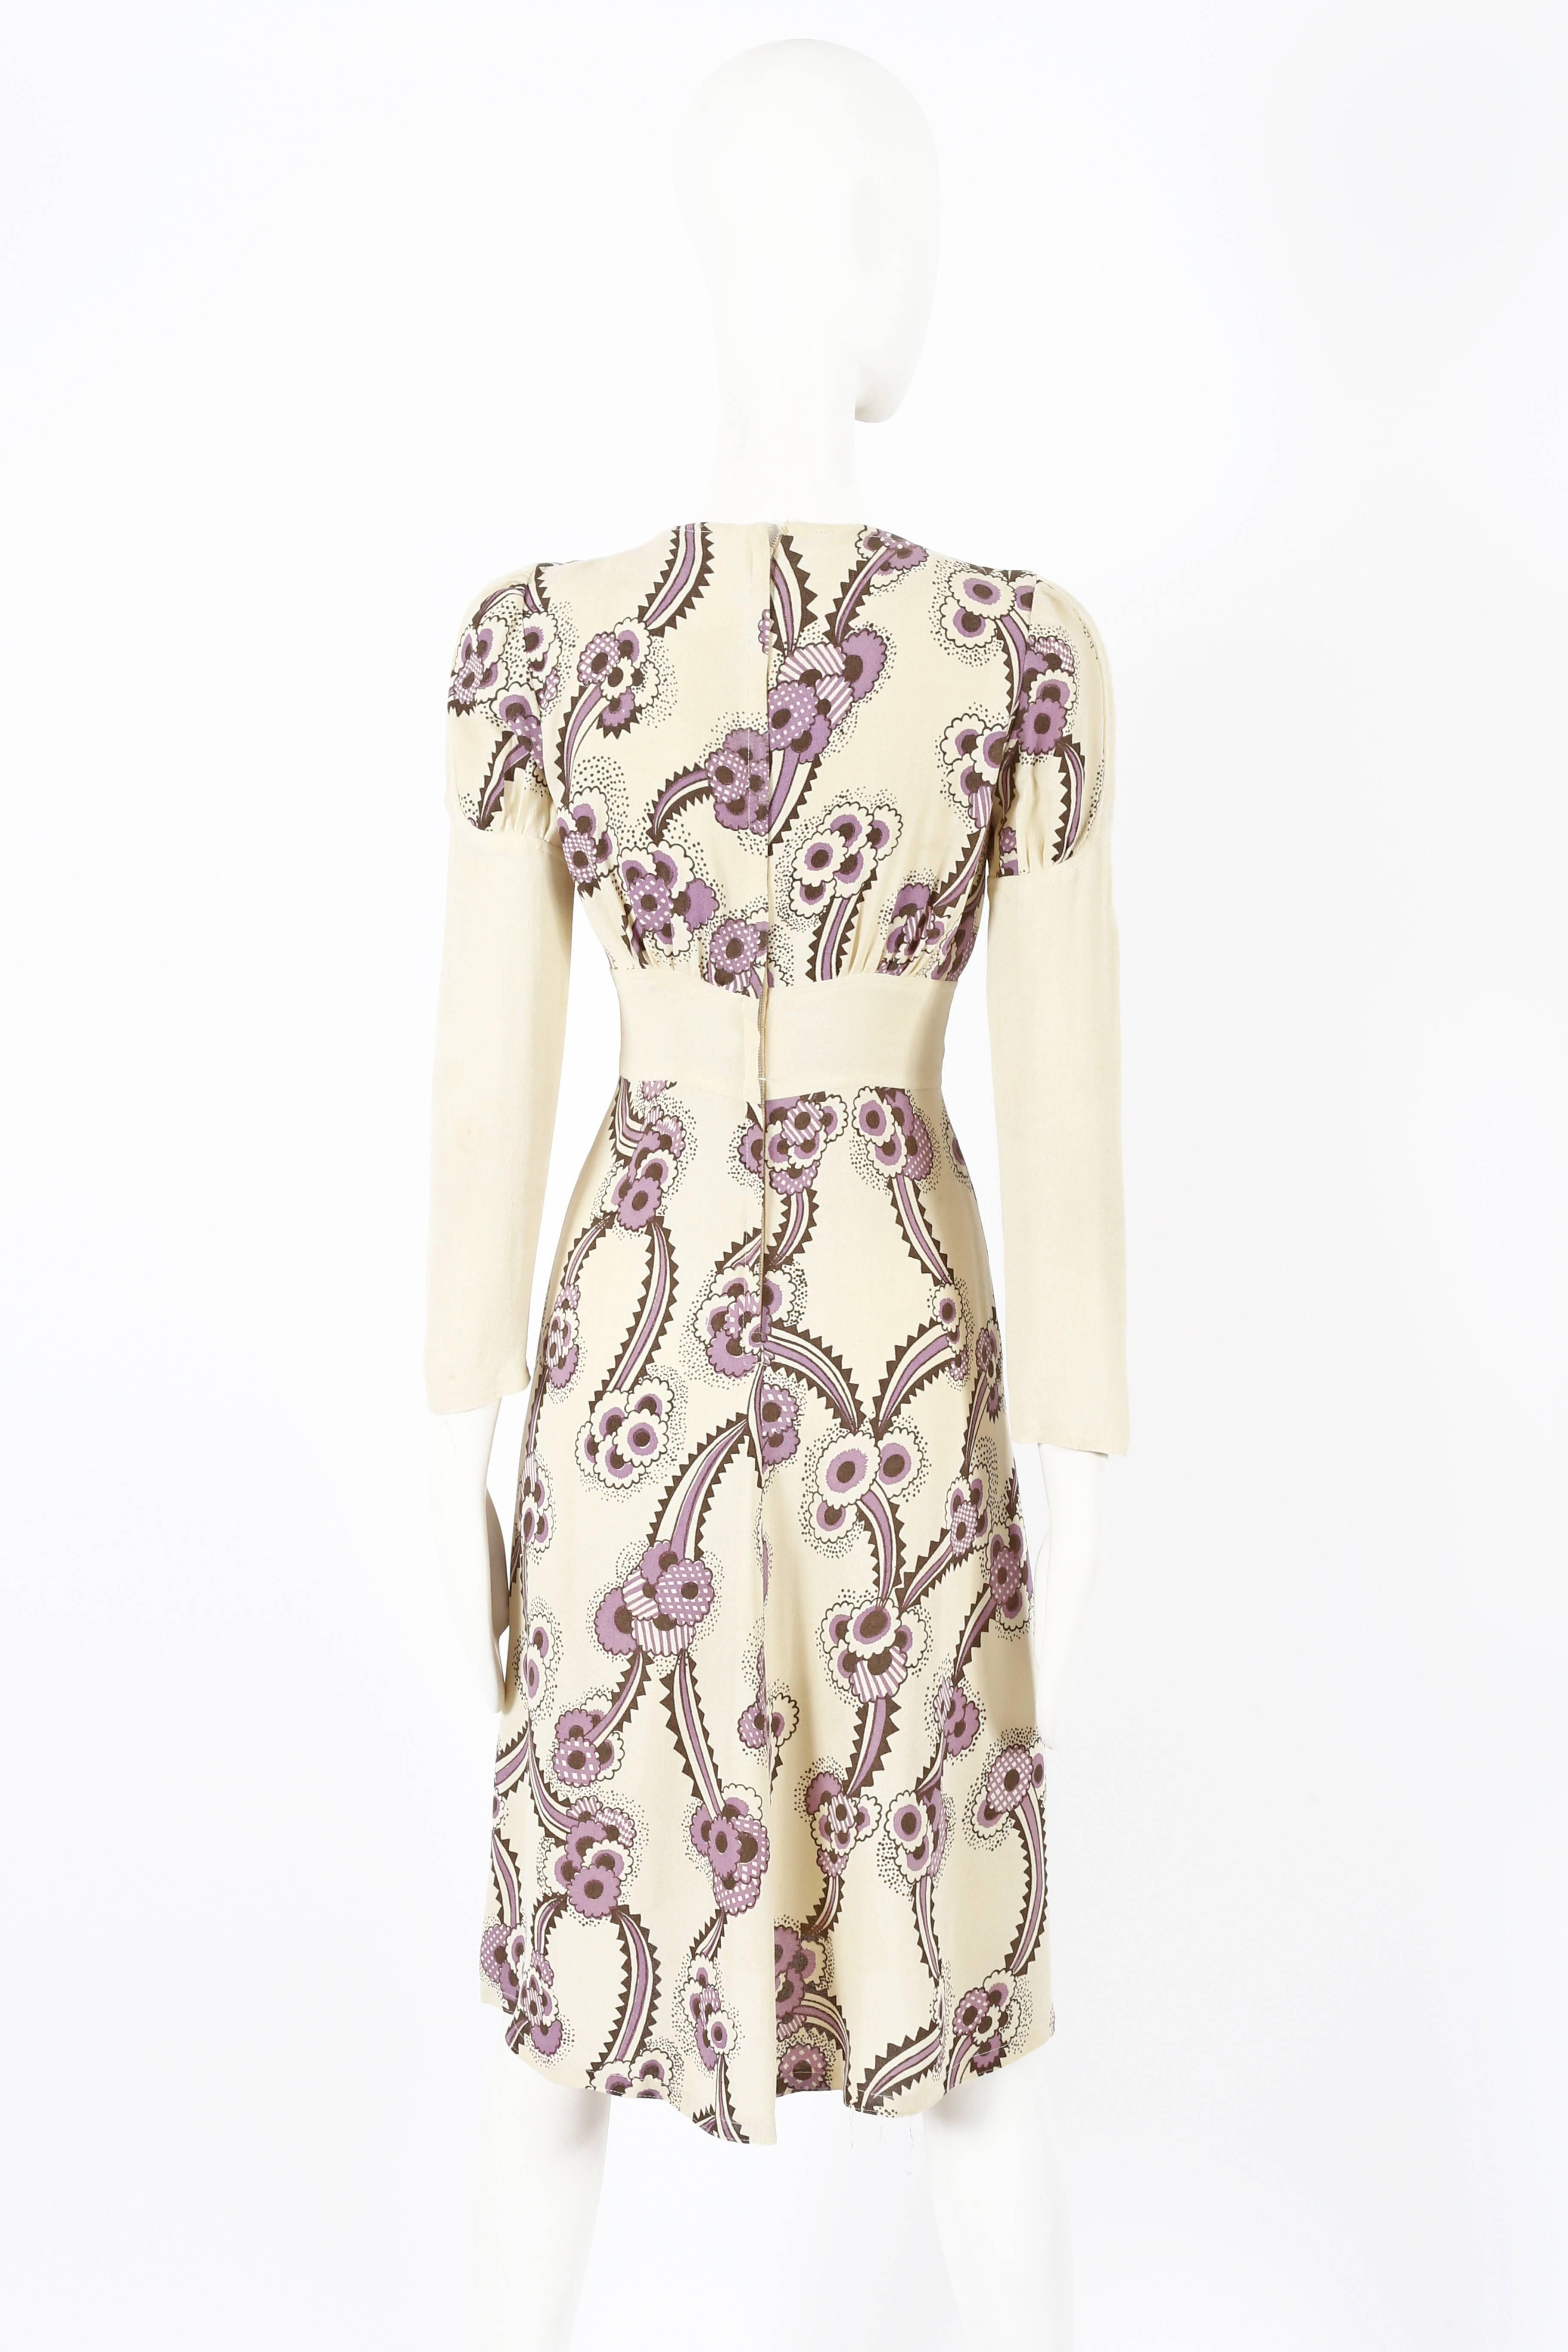 Ossie Clark ivory moss crepe 'Floating Daisies' dress, circa 1970s 2